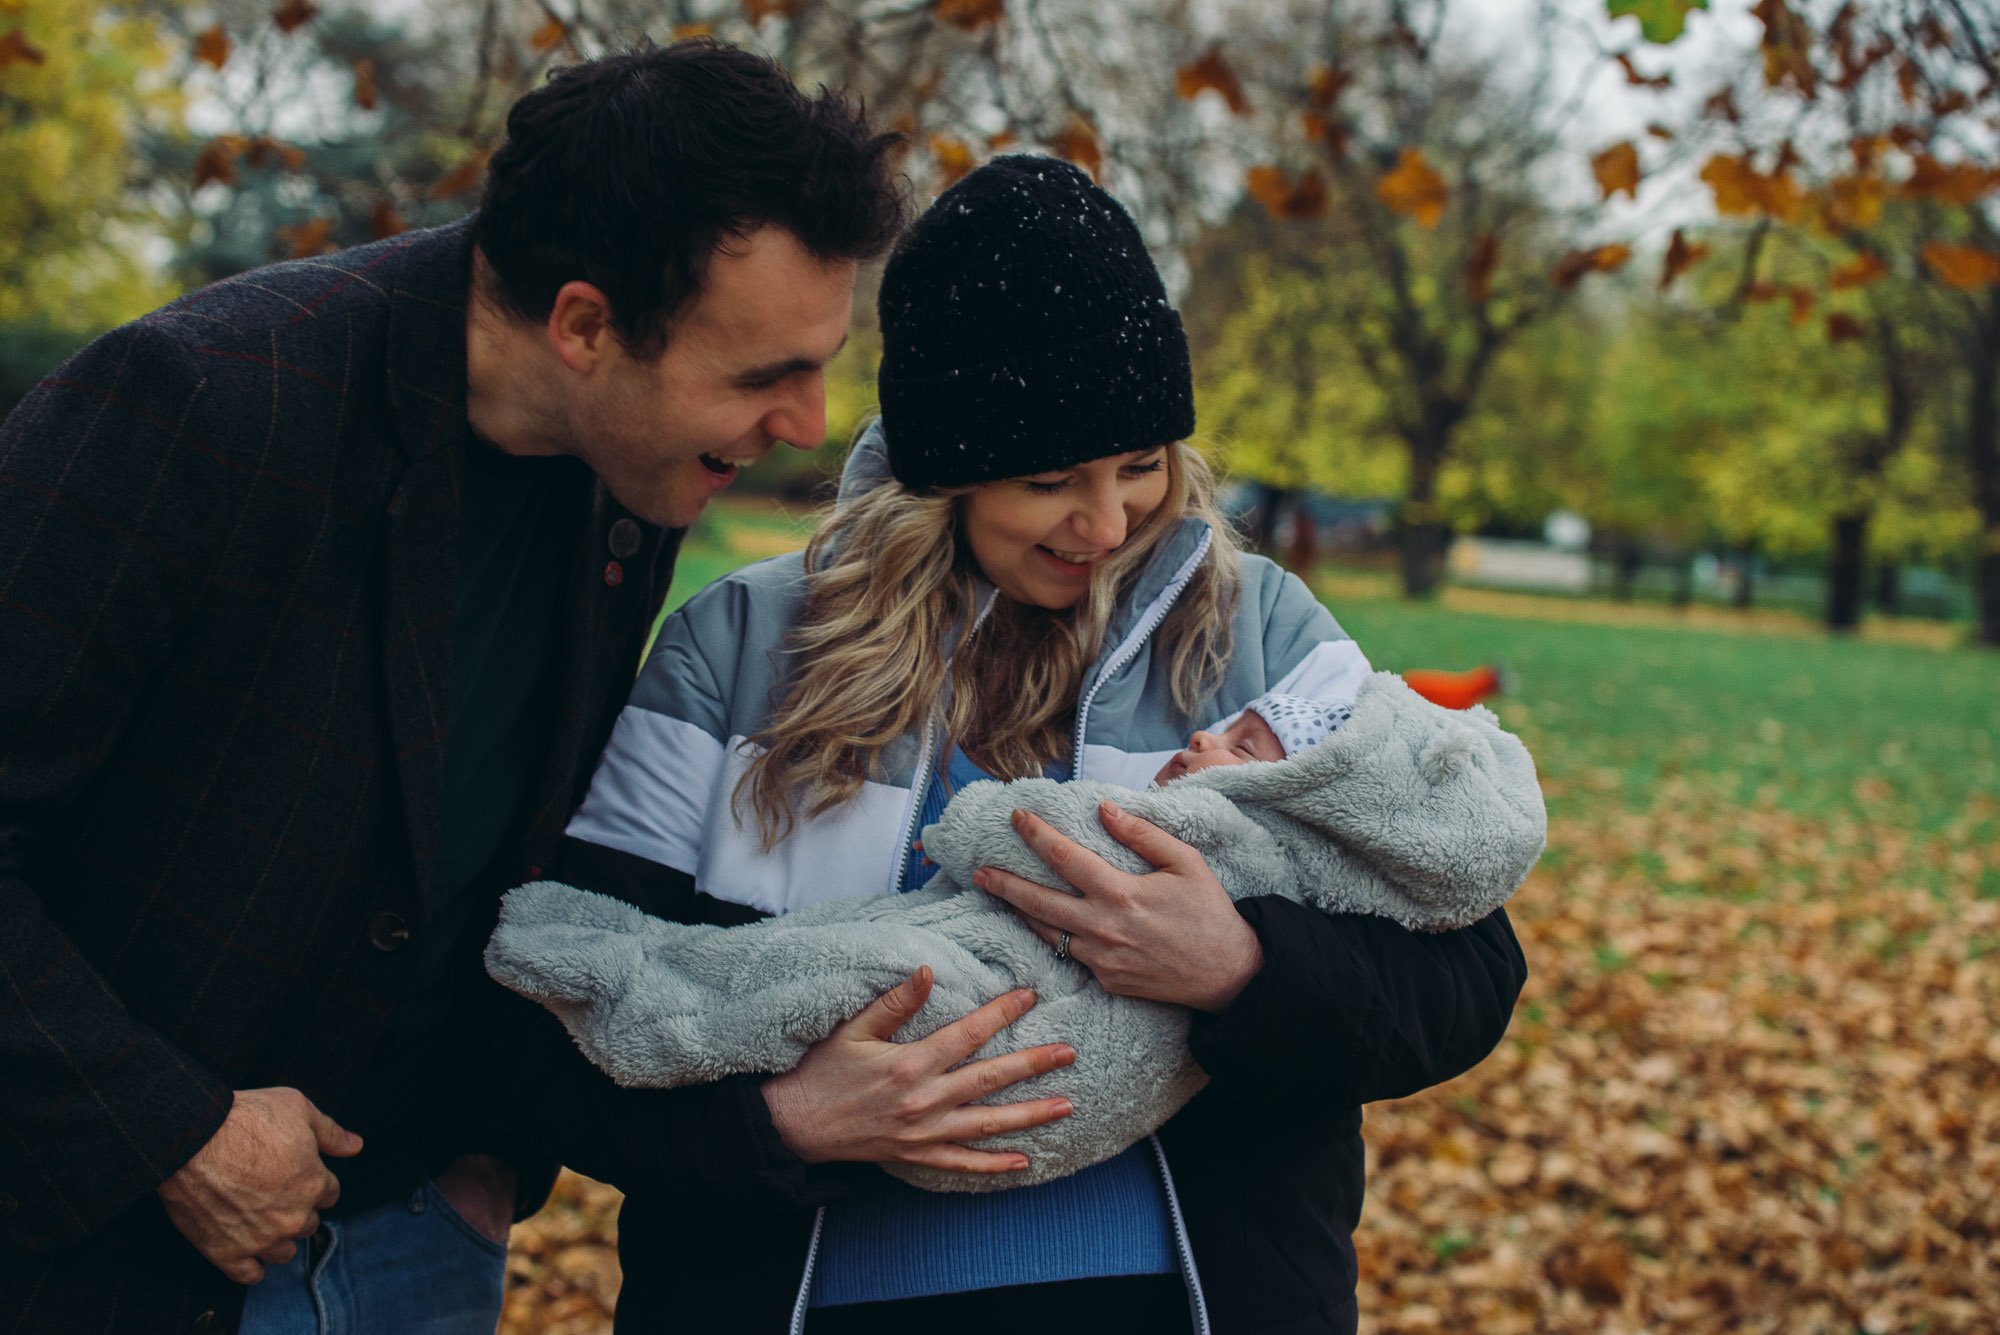 newborn-photography-park-outdoor-photoshoot-brighton-hove-sussex-london-family-photographer-near-me-autumn-leaves-new-parents.jpg